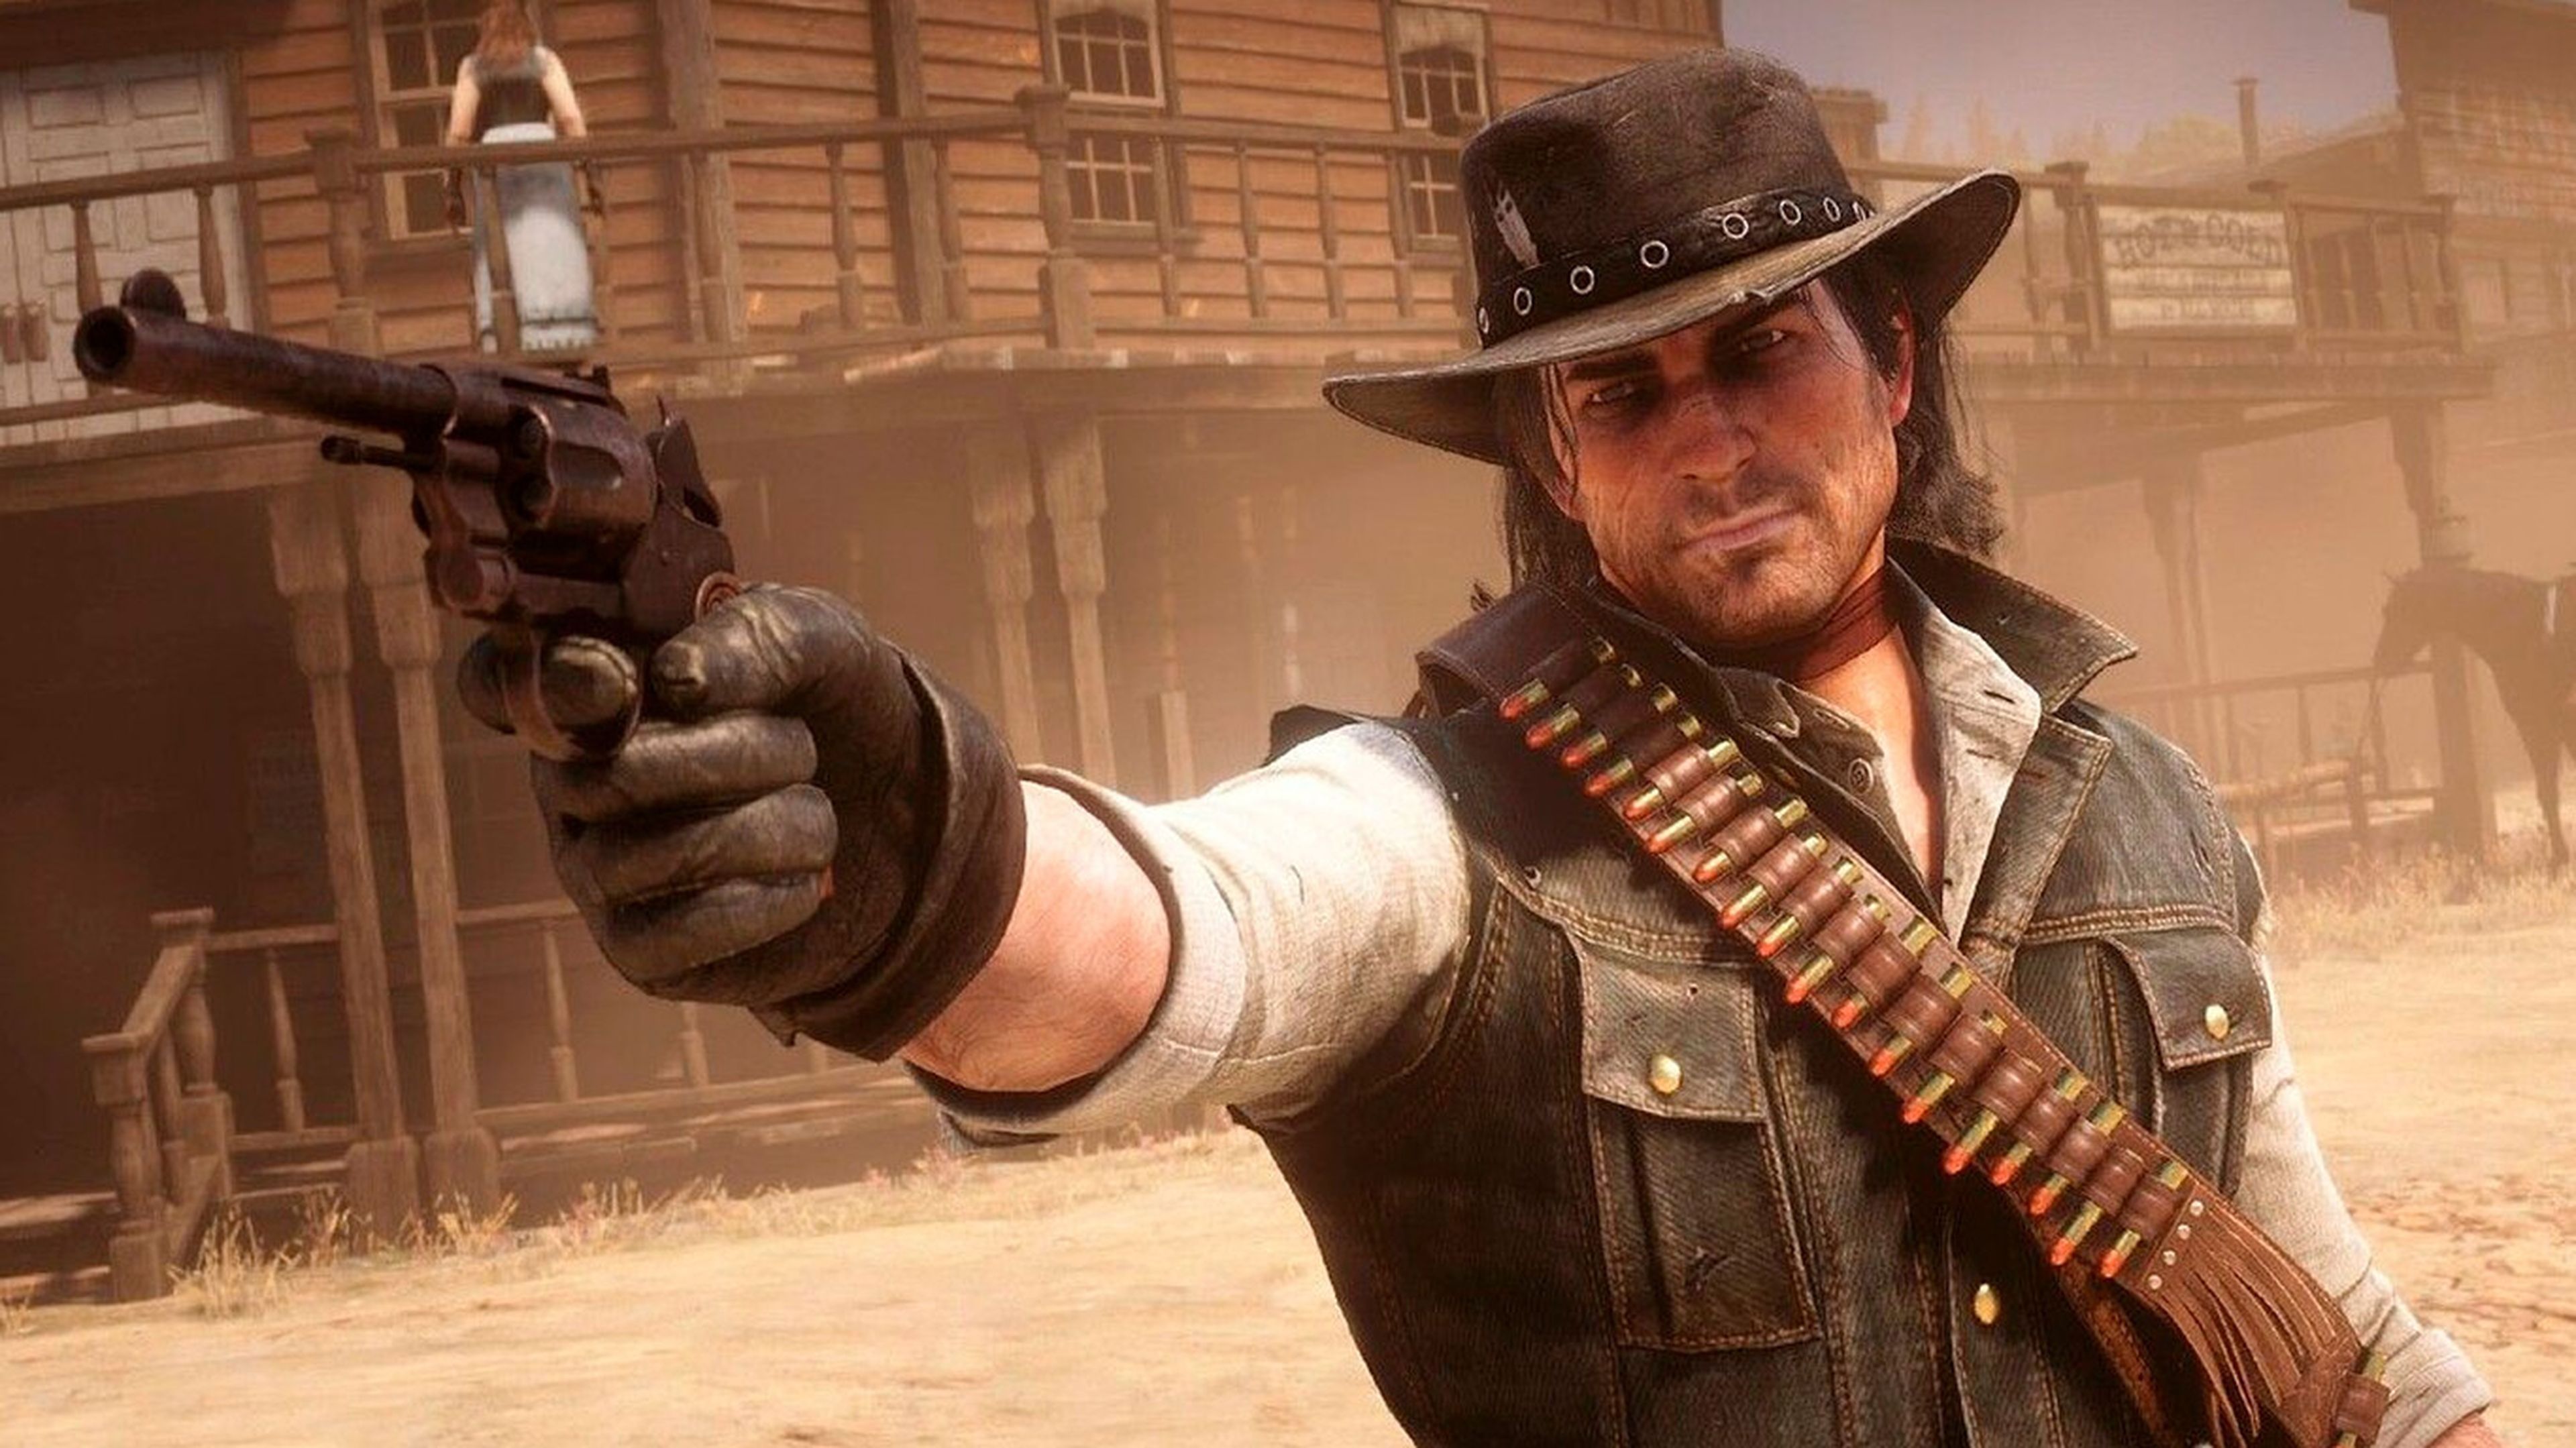 Игра red dead redemption 1. Red Dead Redemption 2. Джон Марстон Red Dead Redemption 1. Джон Марстон в rdr 1. Red Dead Redemption 2 Джон.